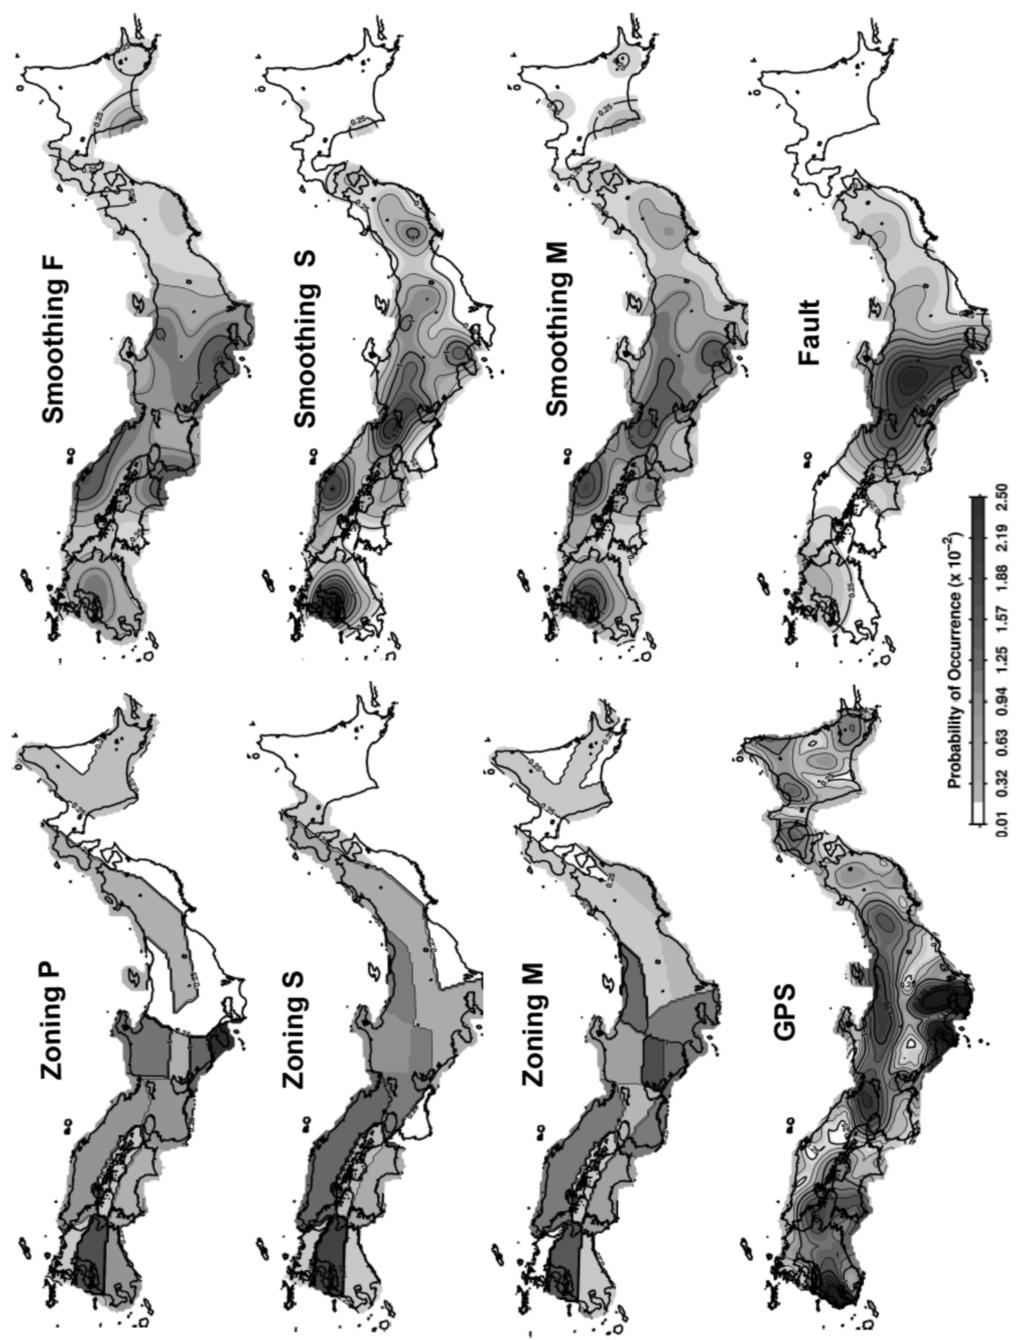 W. TRIYOSO AND K. SHIMAZAKI: SEISMIC POTENTIAL MODEL TESTING 675 Fig. 2. Eight earthquake potential models showing a probability of occurrence of large shallow crustal earthquakes (M 6.